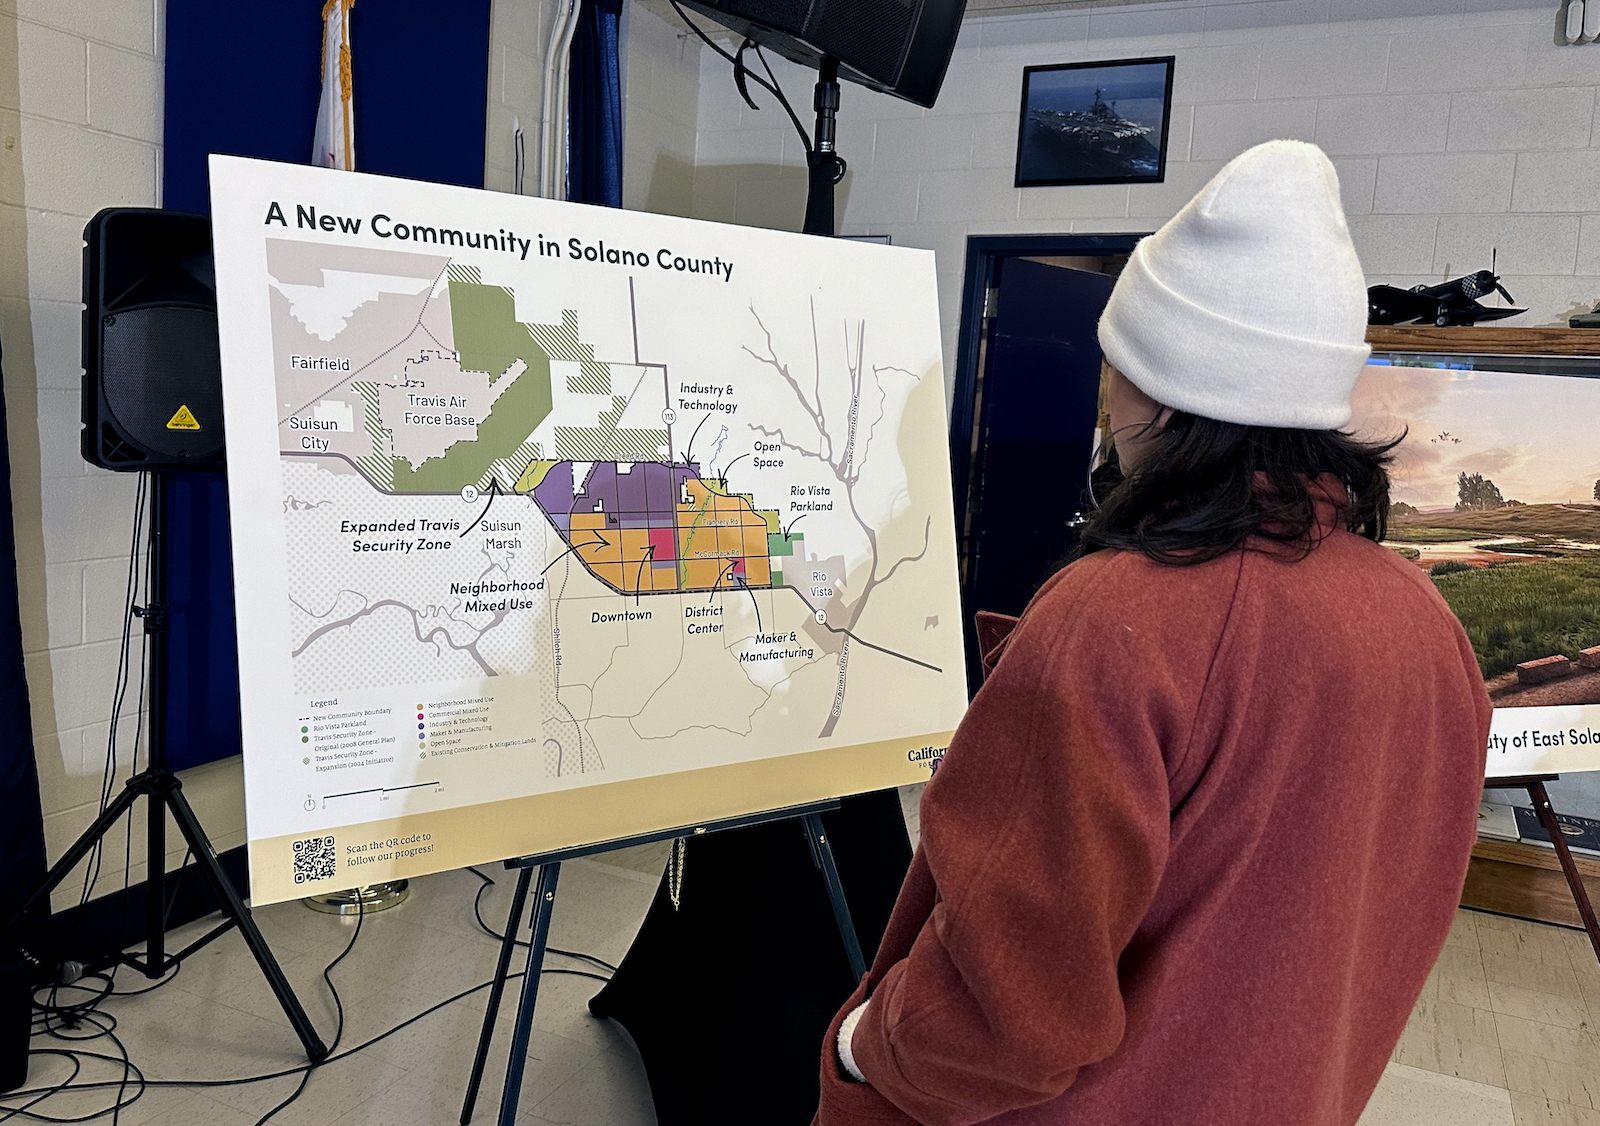 A person looks at a map poster that says 'a new community in solano county'